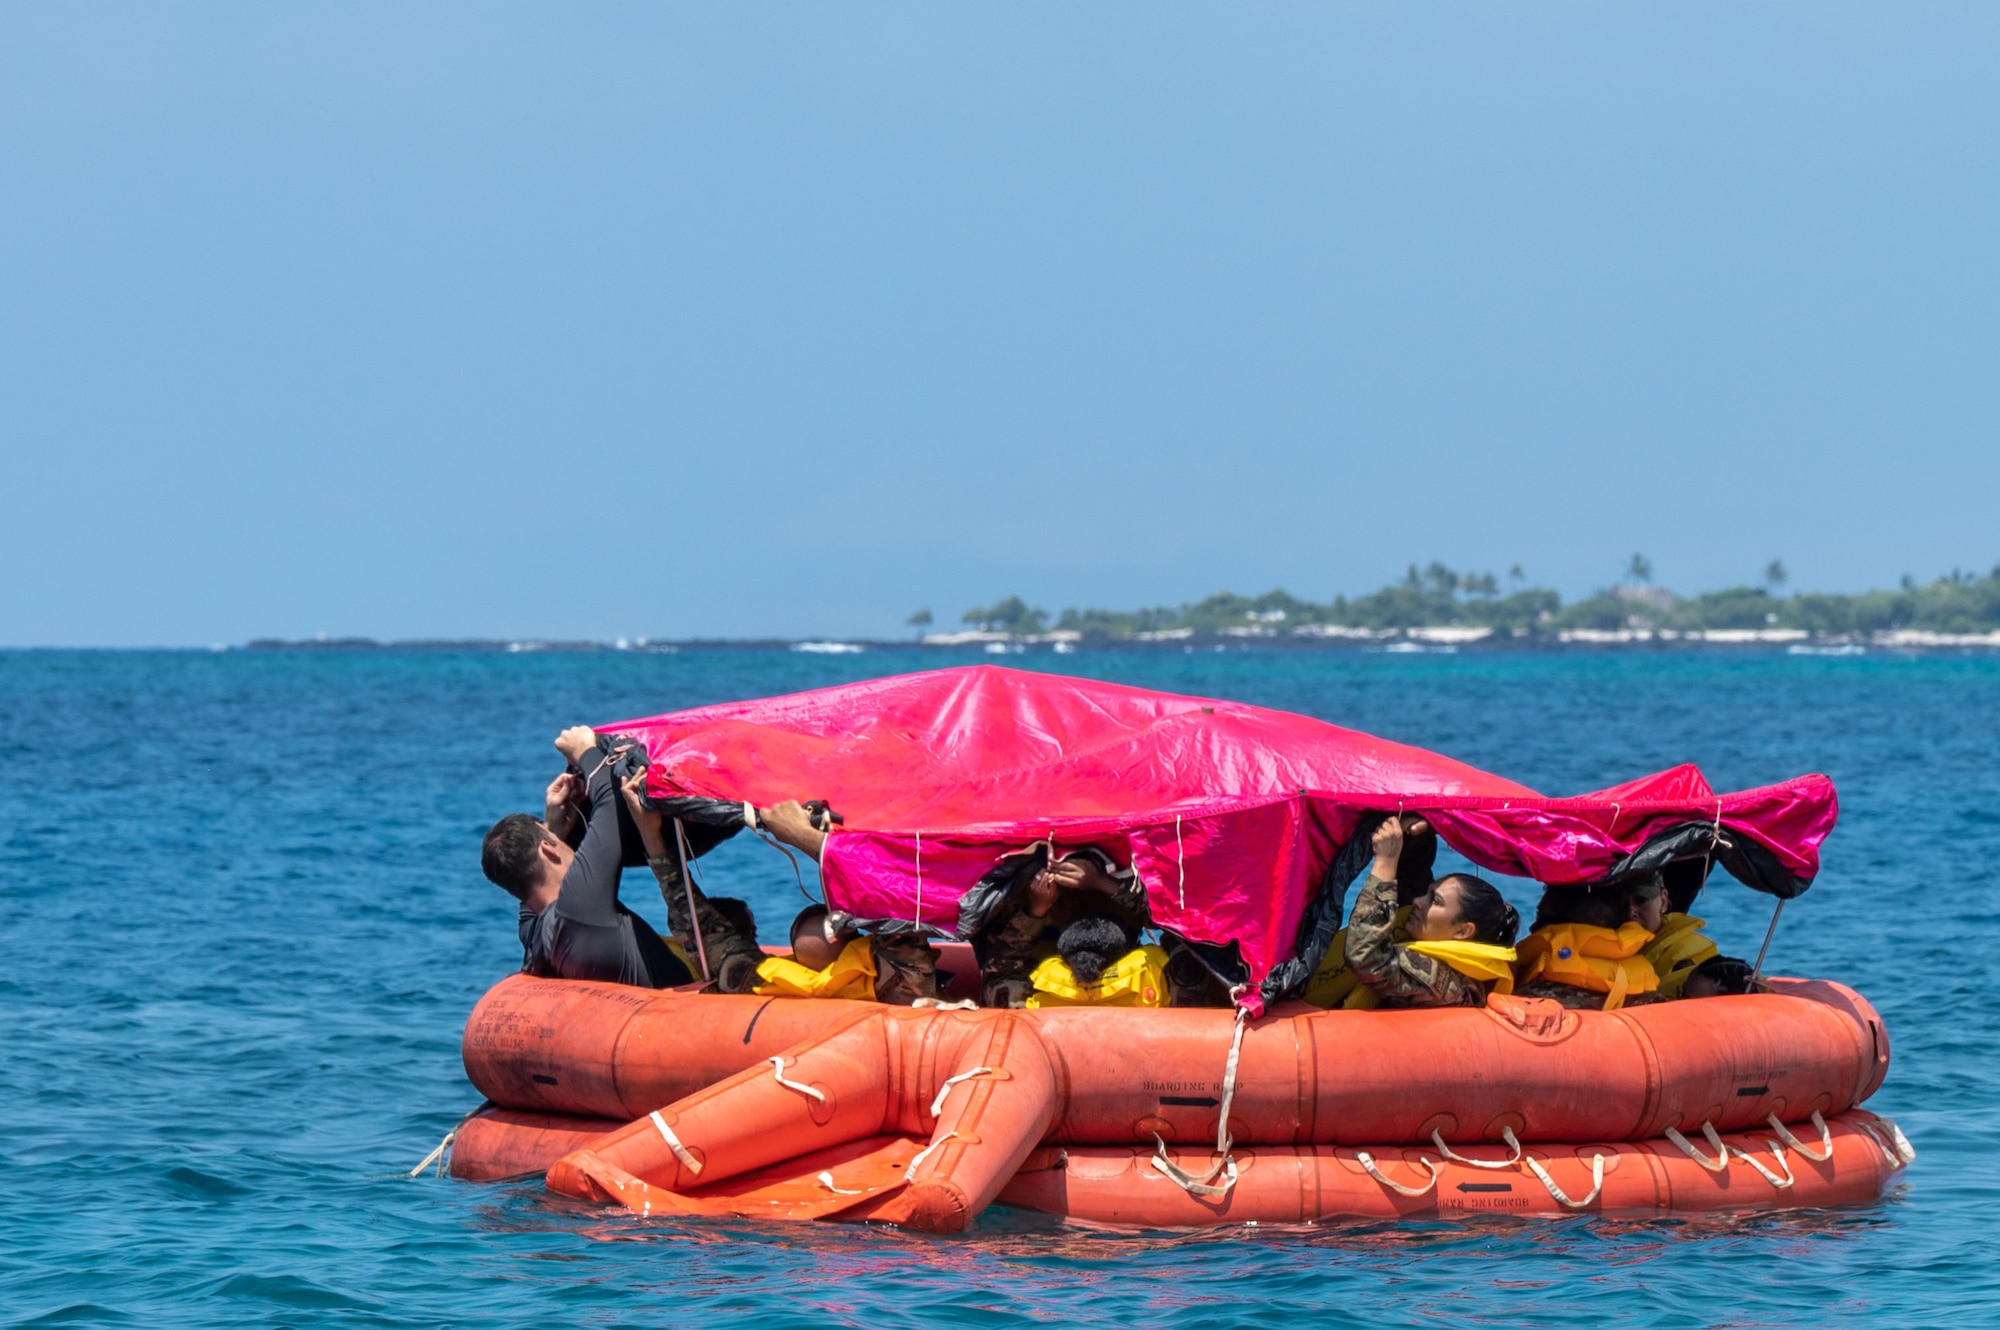 people in an orange life boat float in the water and hold a red canopy above them